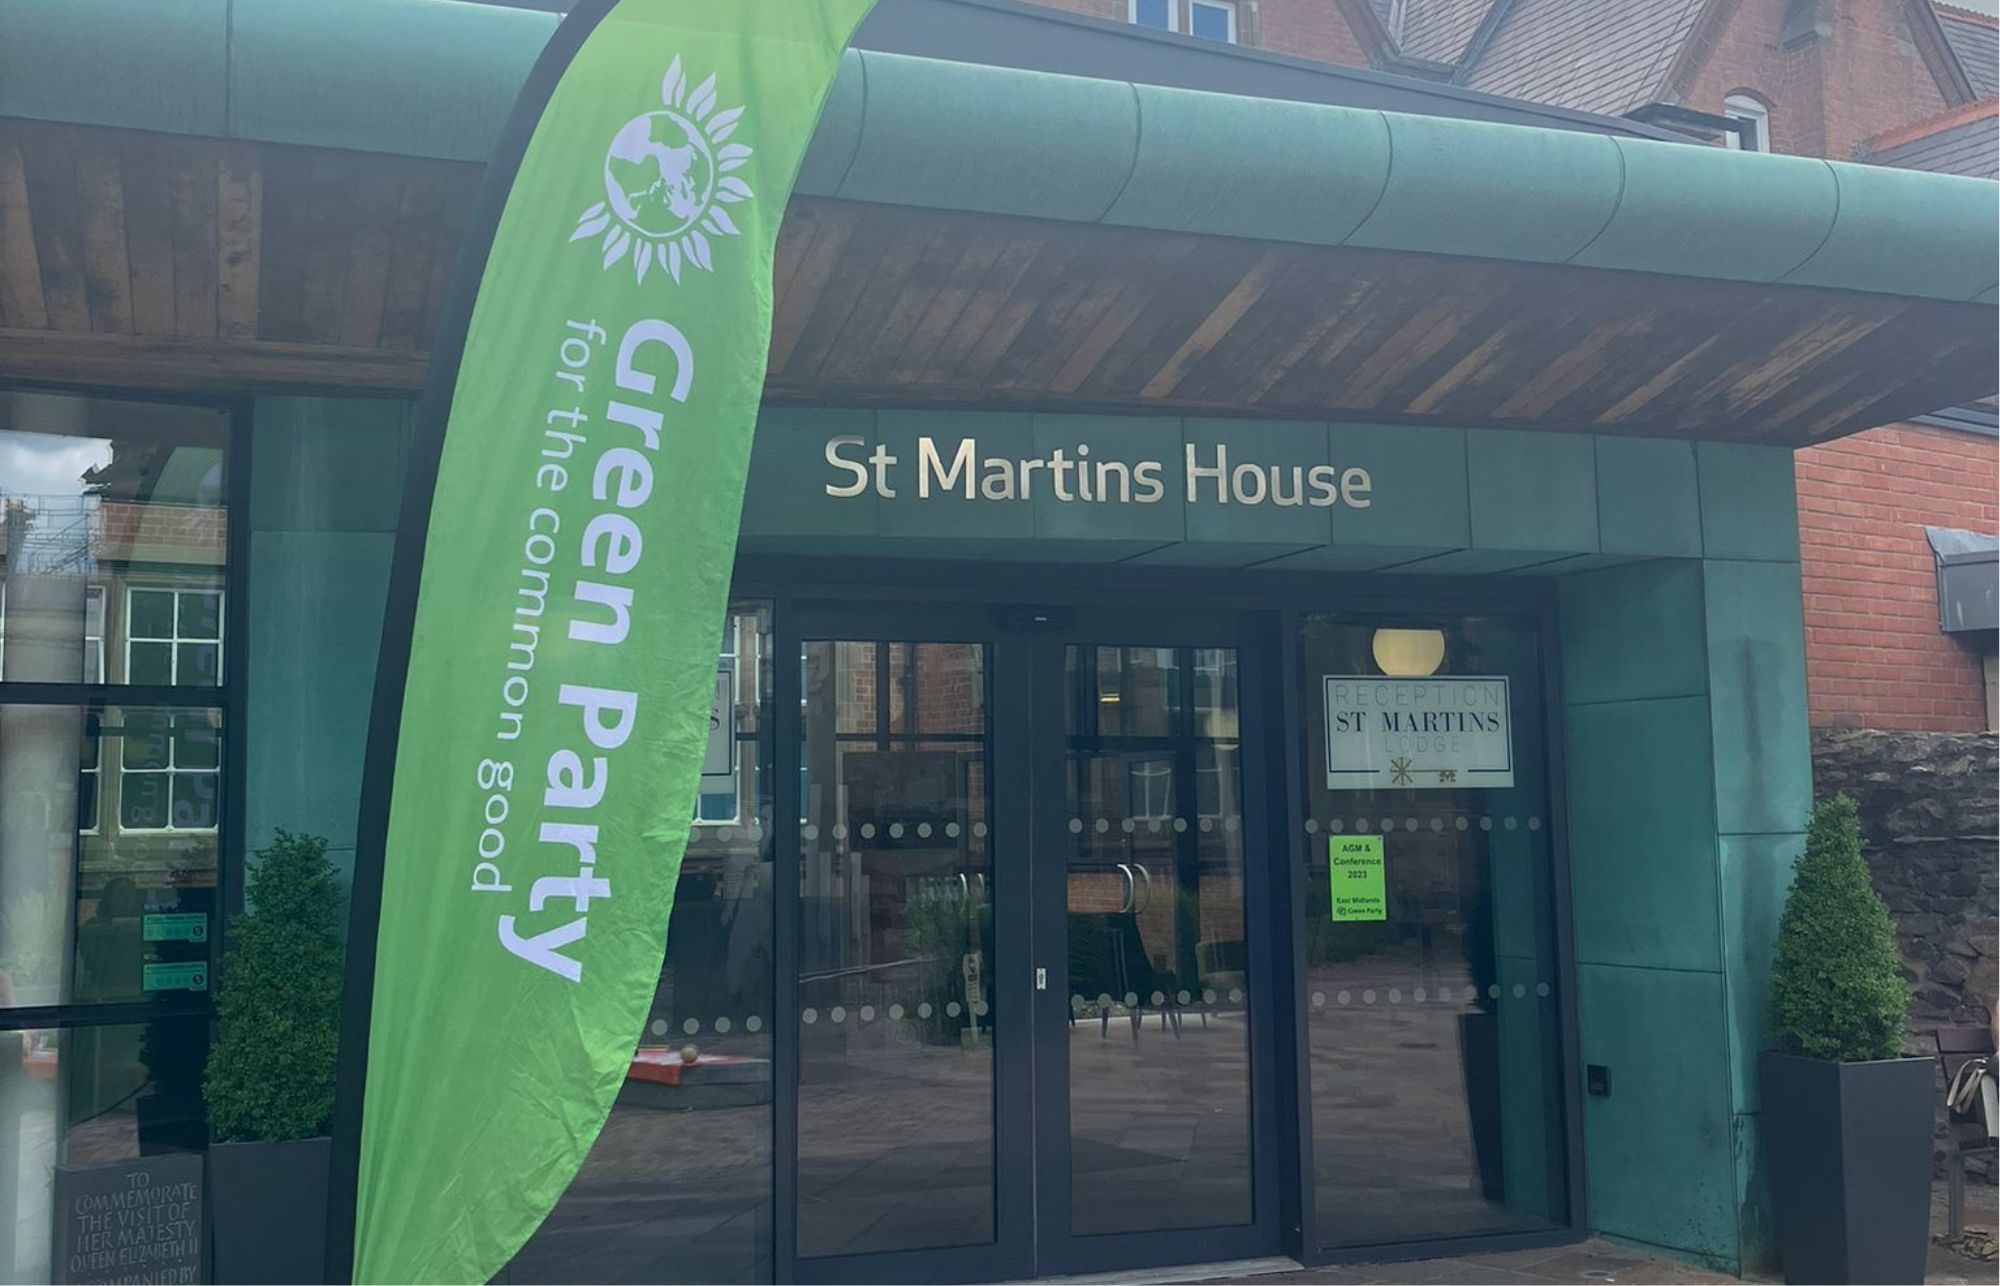 The Green Flag Flying Outside the EMGP 2023 Annual Meeting and Conference in Leicester